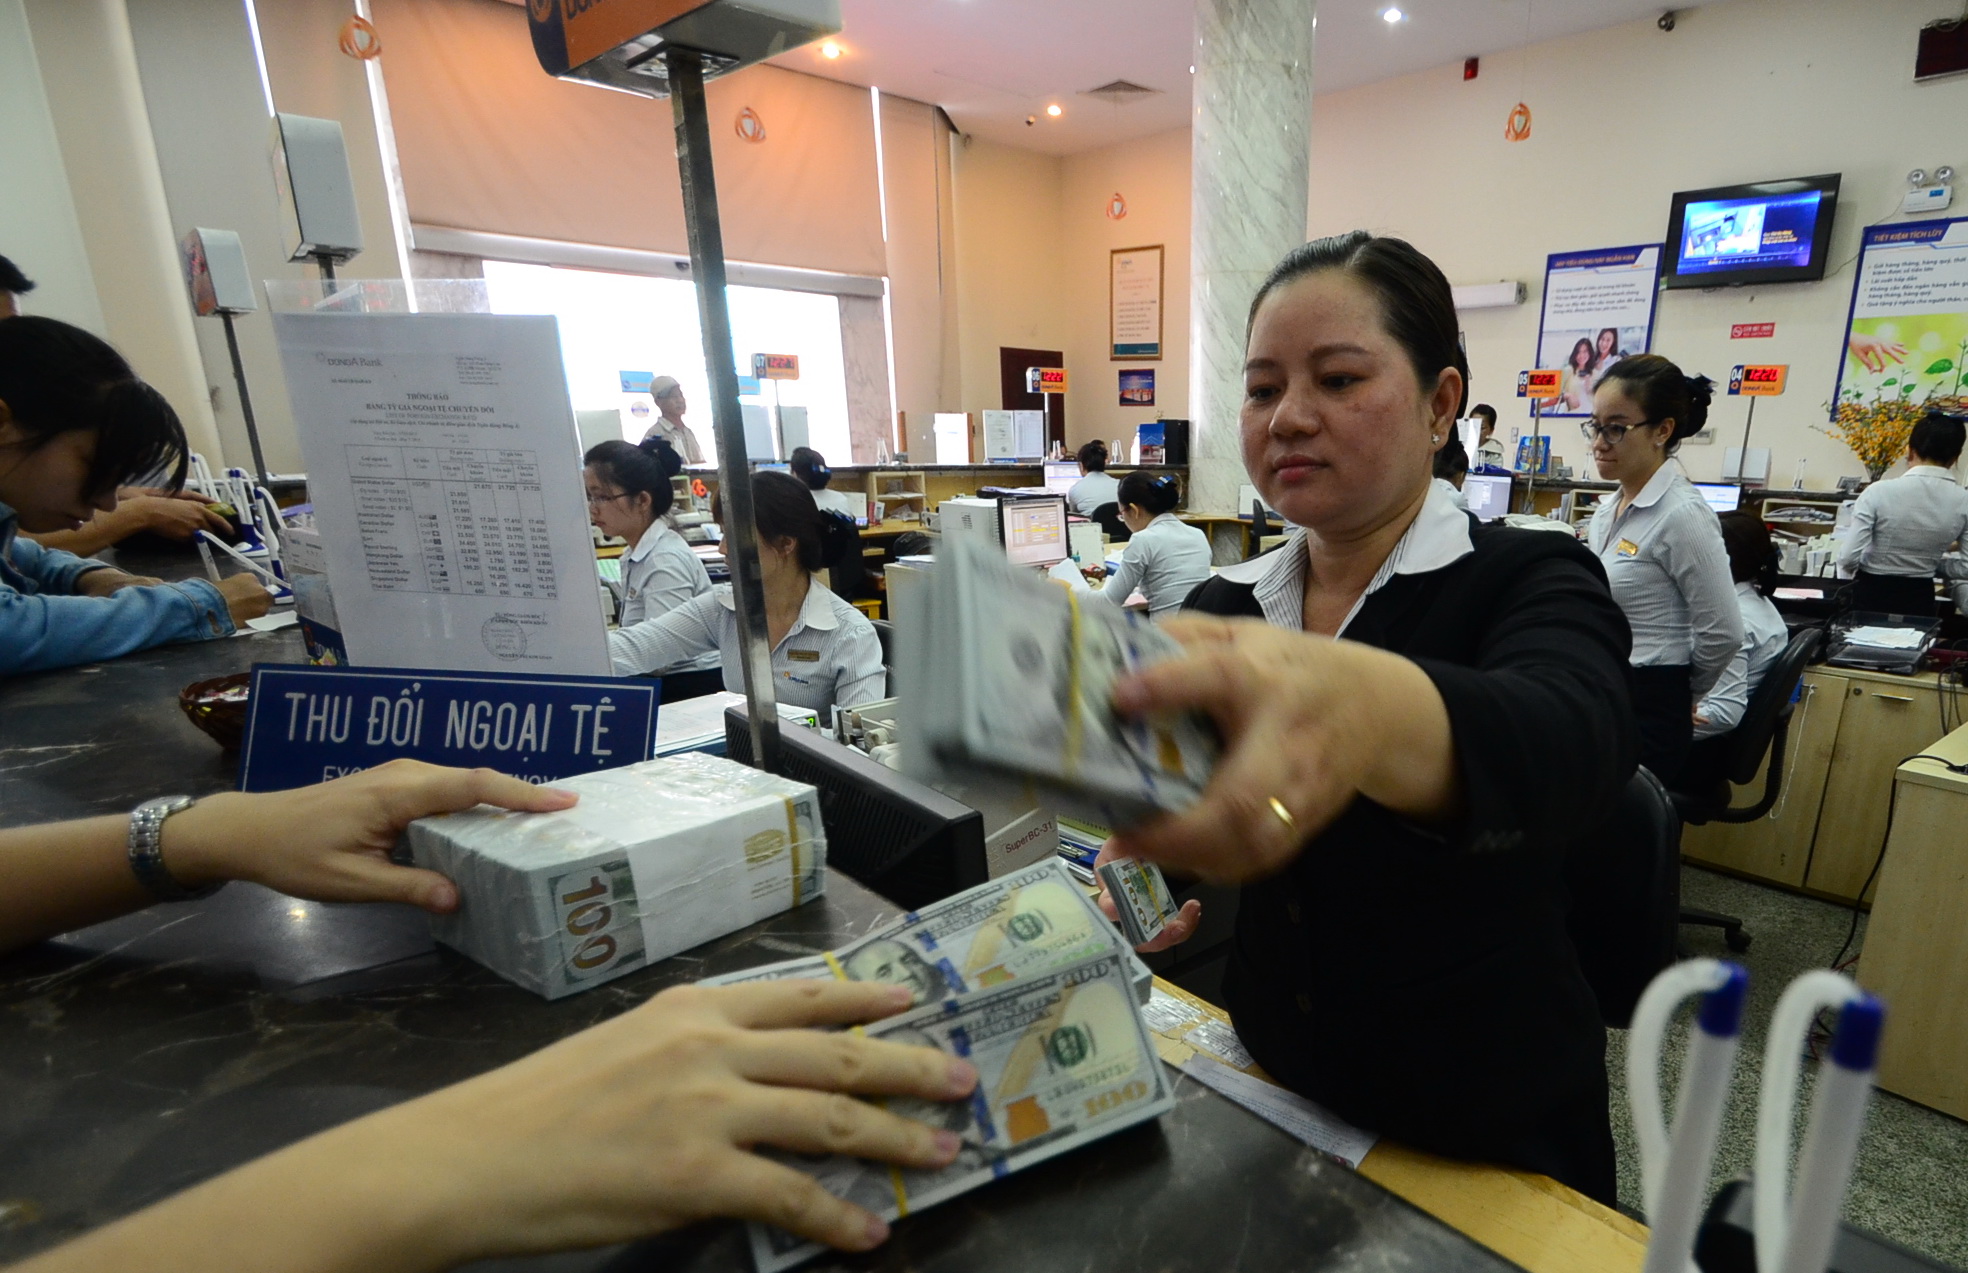 One-fifth of remittance to Ho Chi Minh City channeled into real estate